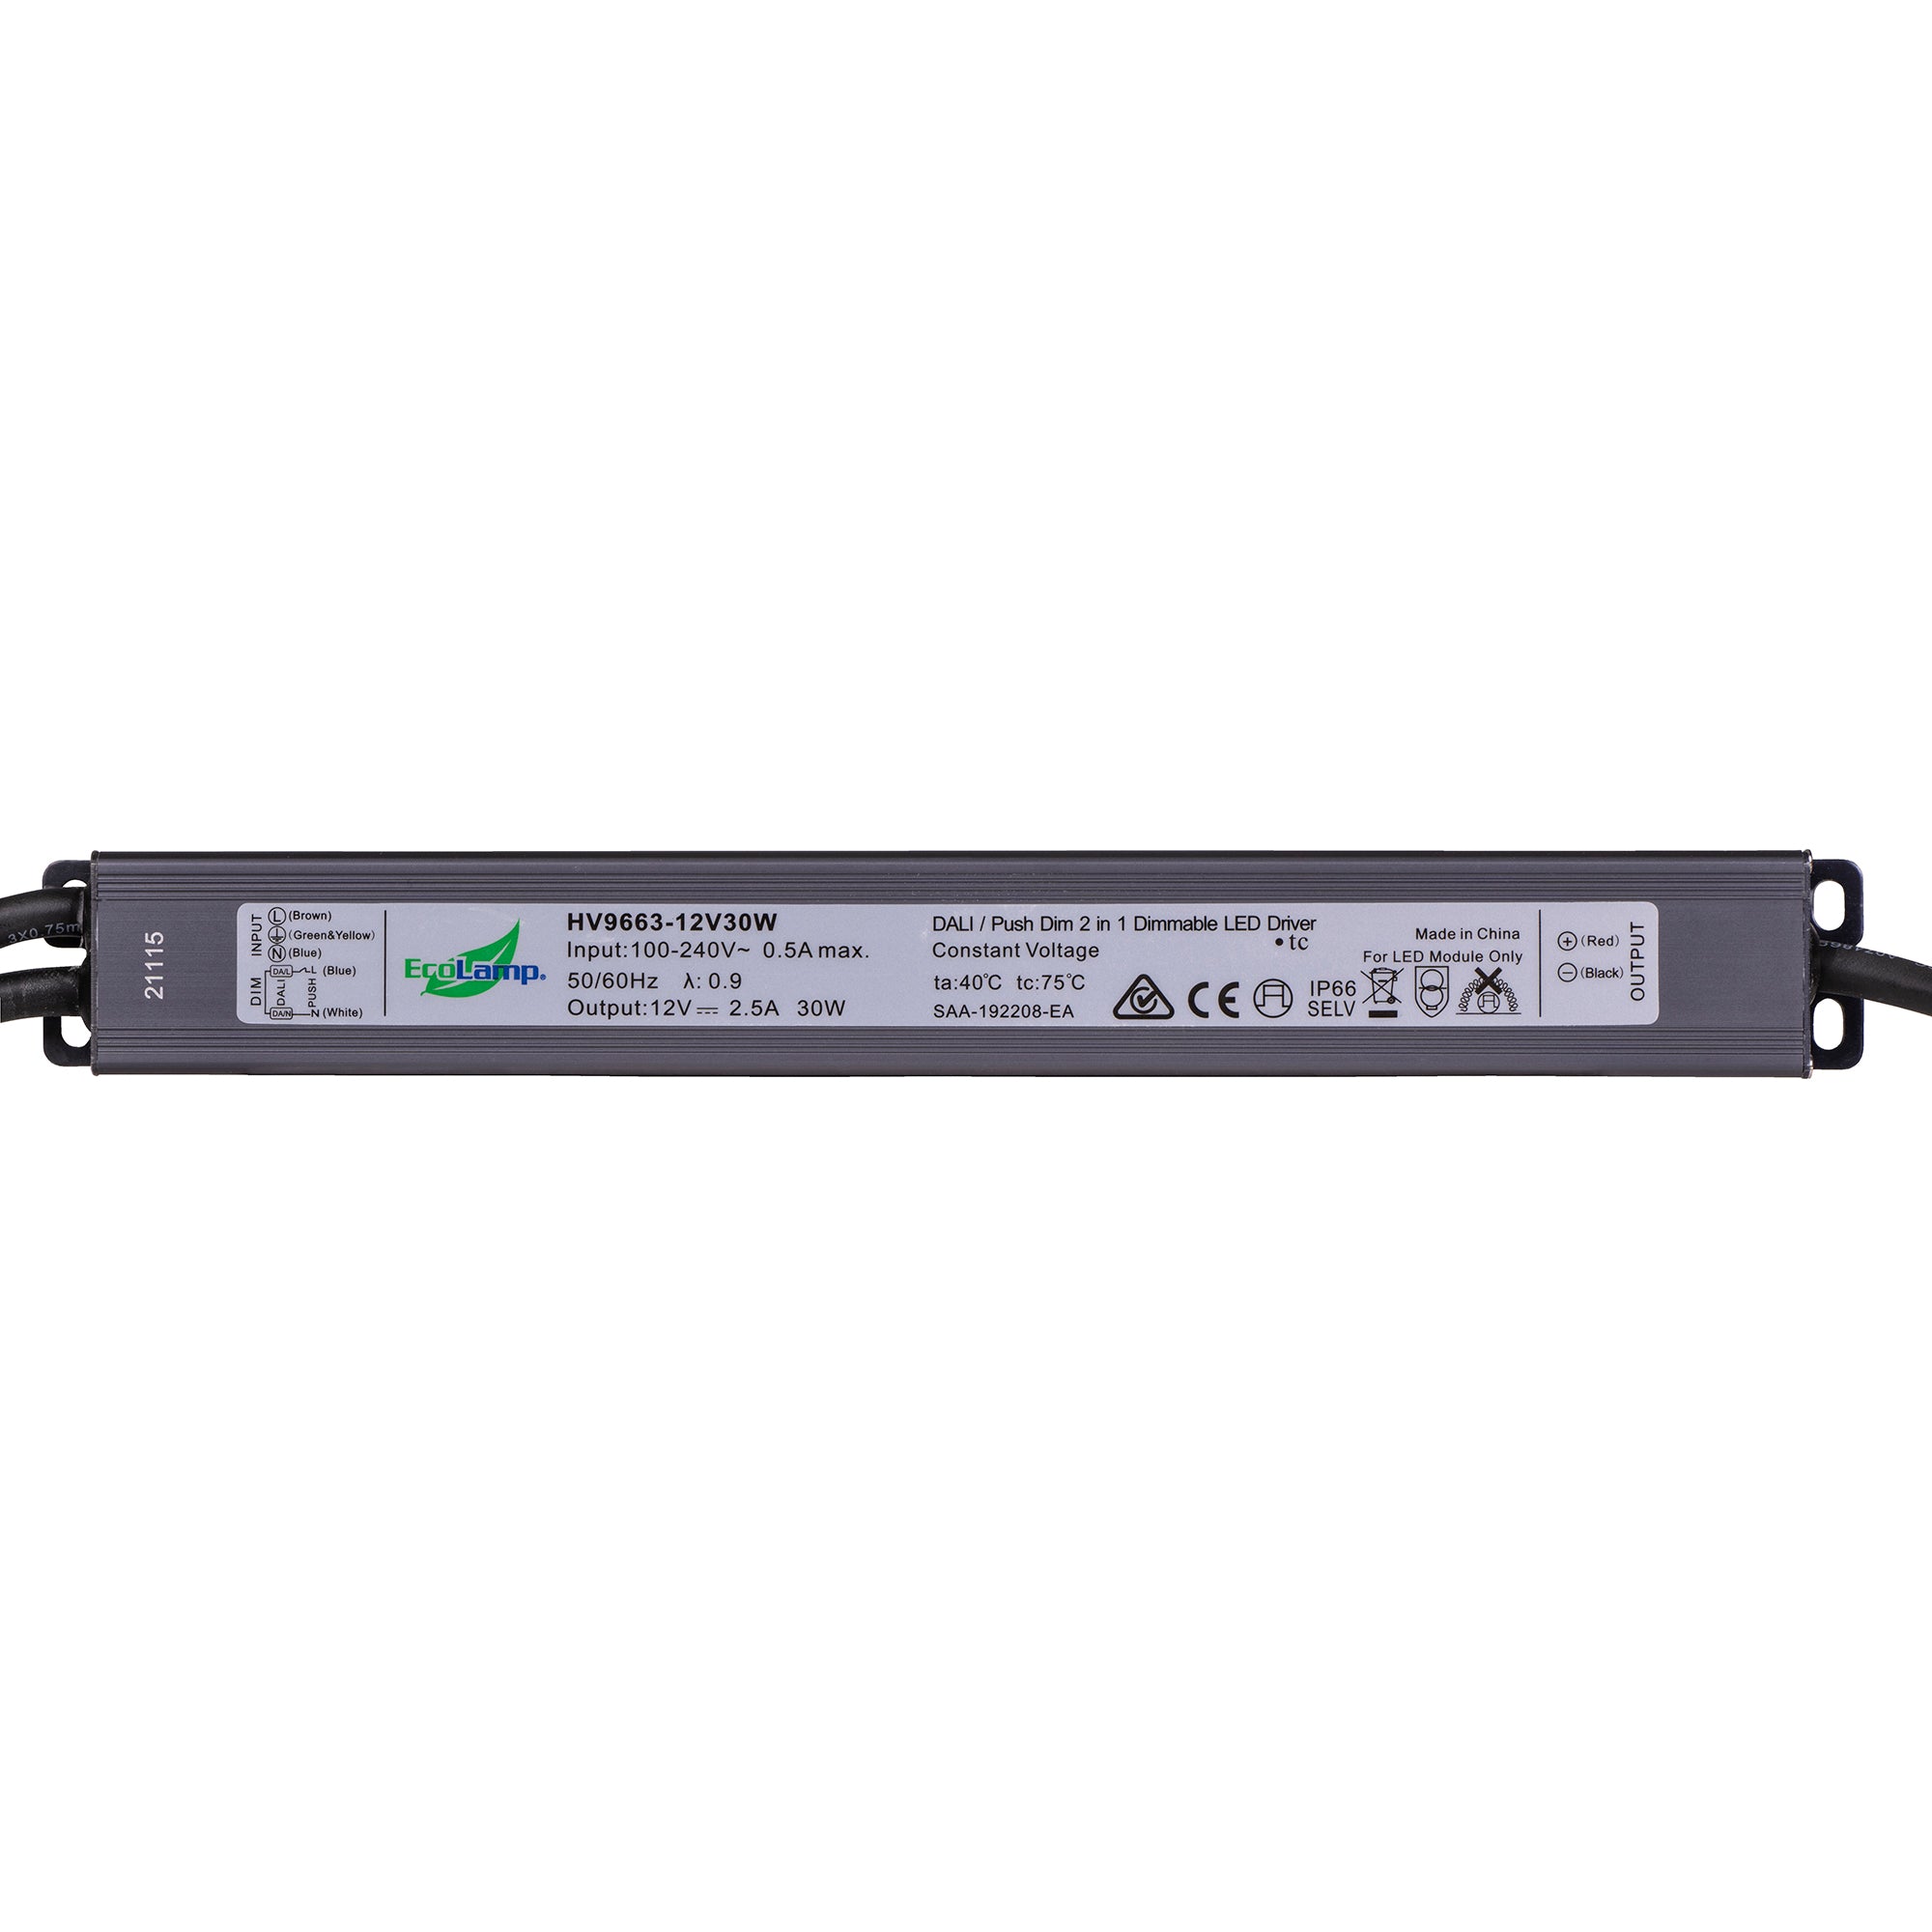 HV9663-30W - 30W Dali Dimmable LED Driver